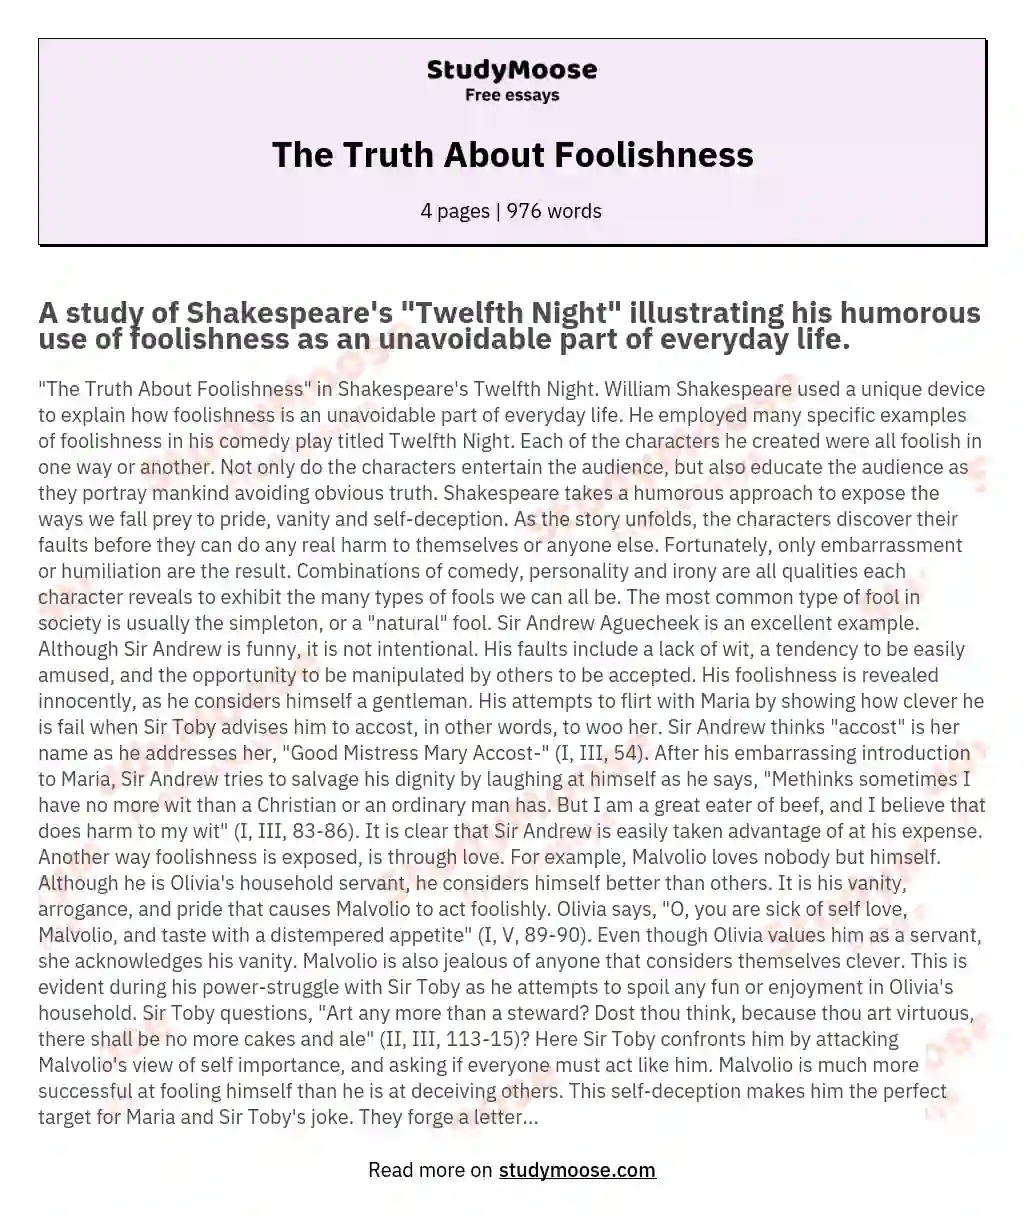 The Truth About Foolishness essay